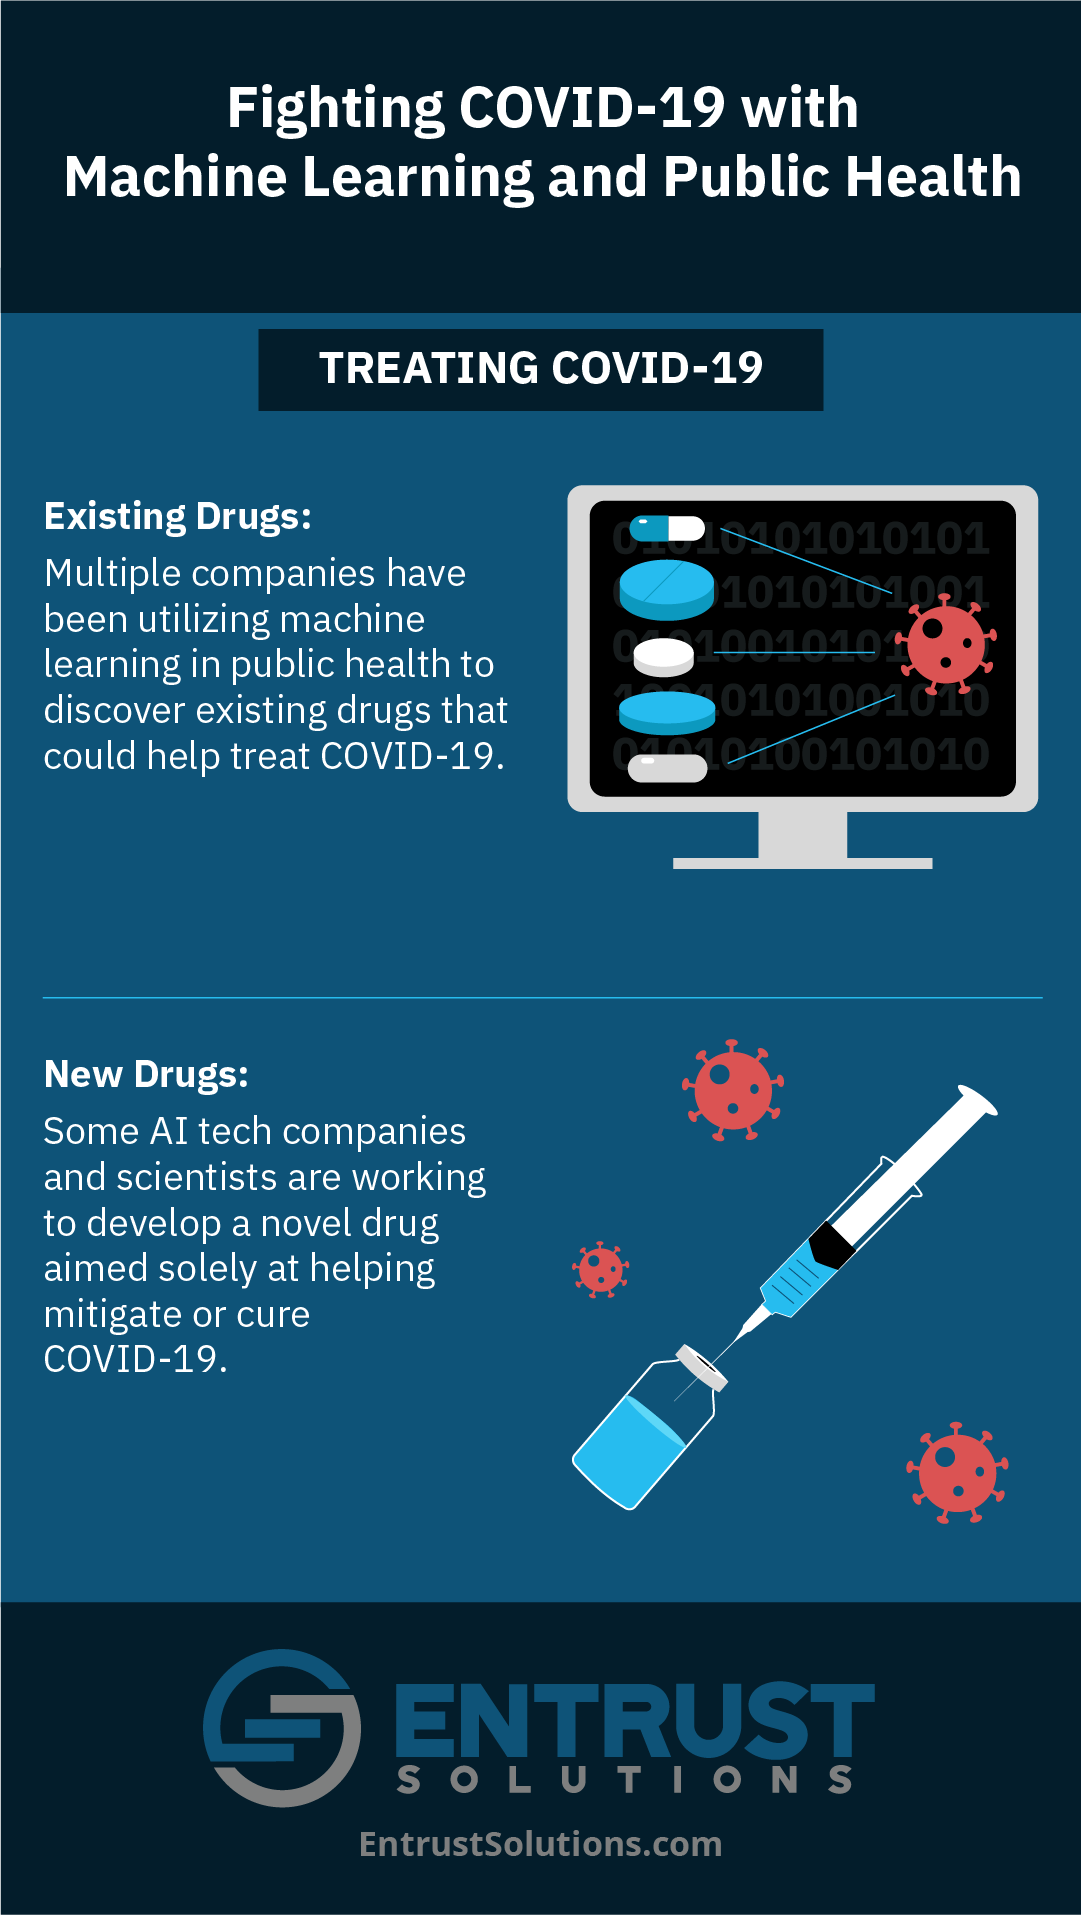 Scientists and organizations are working to treat COVID-19 with machine learning and public health via both existing drugs and new drugs.